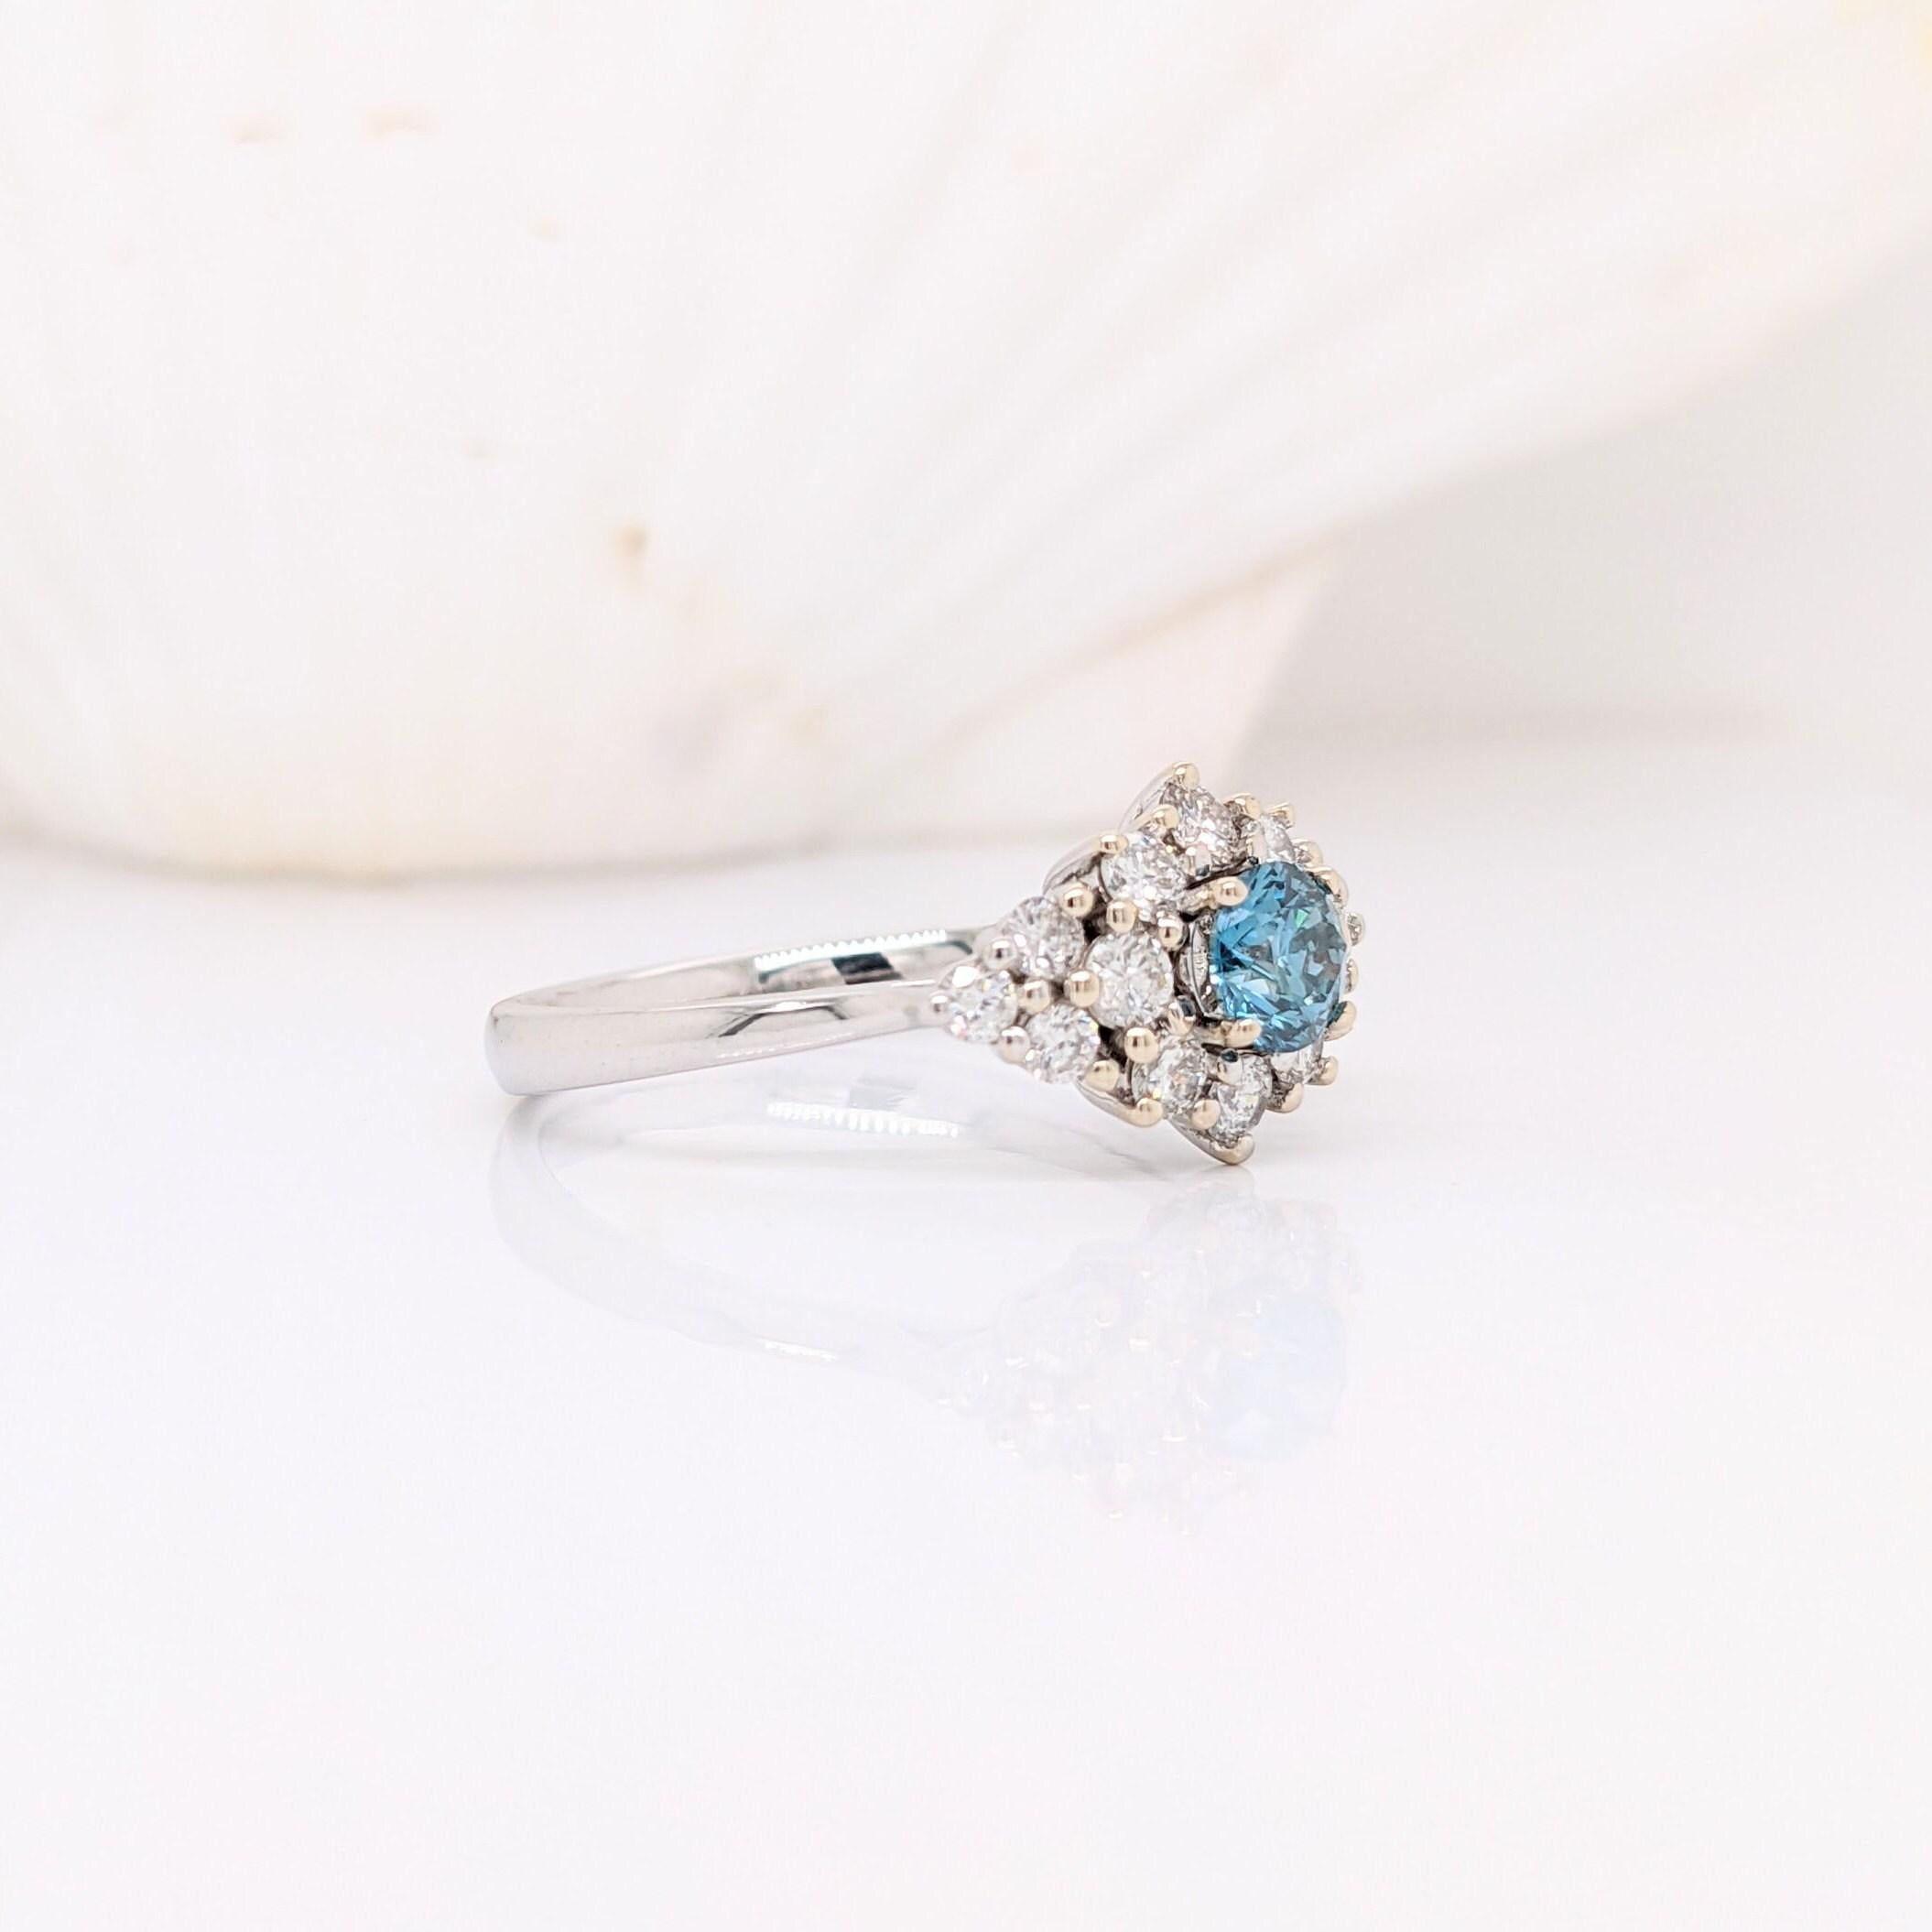 We've set this light Blue diamond with loads of white diamond accents to create the most sparkly and luxurious ring.  Diamonds are set in solid 14K gold with strong prongs to allow you be able to wear it worry free daily! 

Specifications

Item